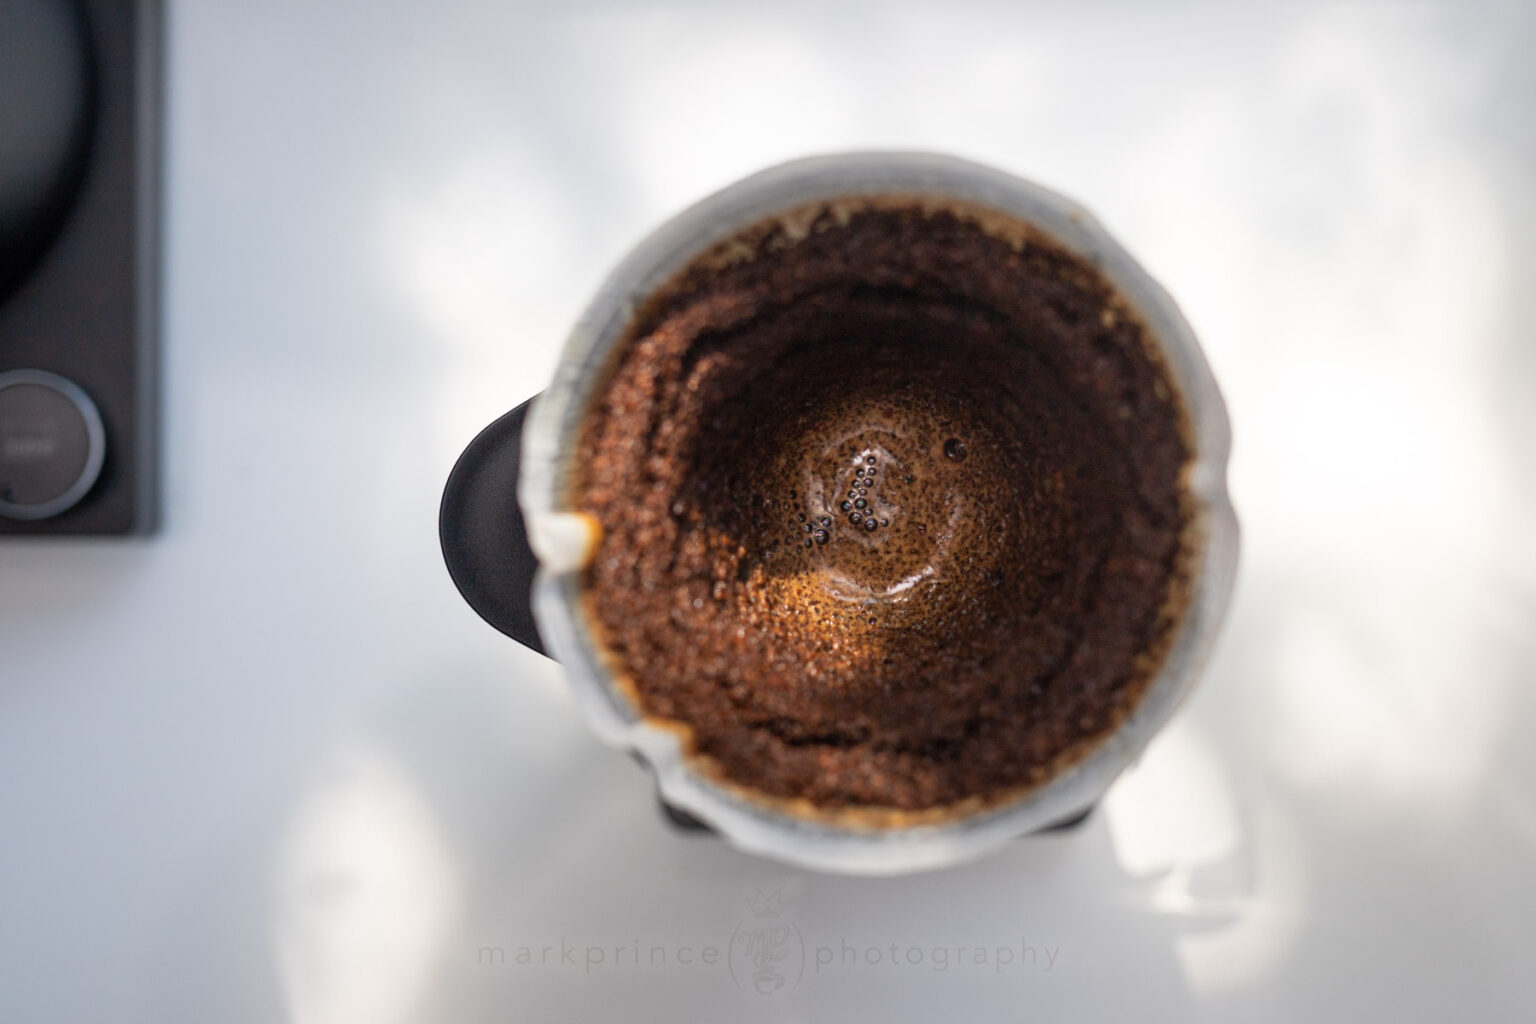 When the brew is done, you should see a cone shape of spent coffee inside the dripper.